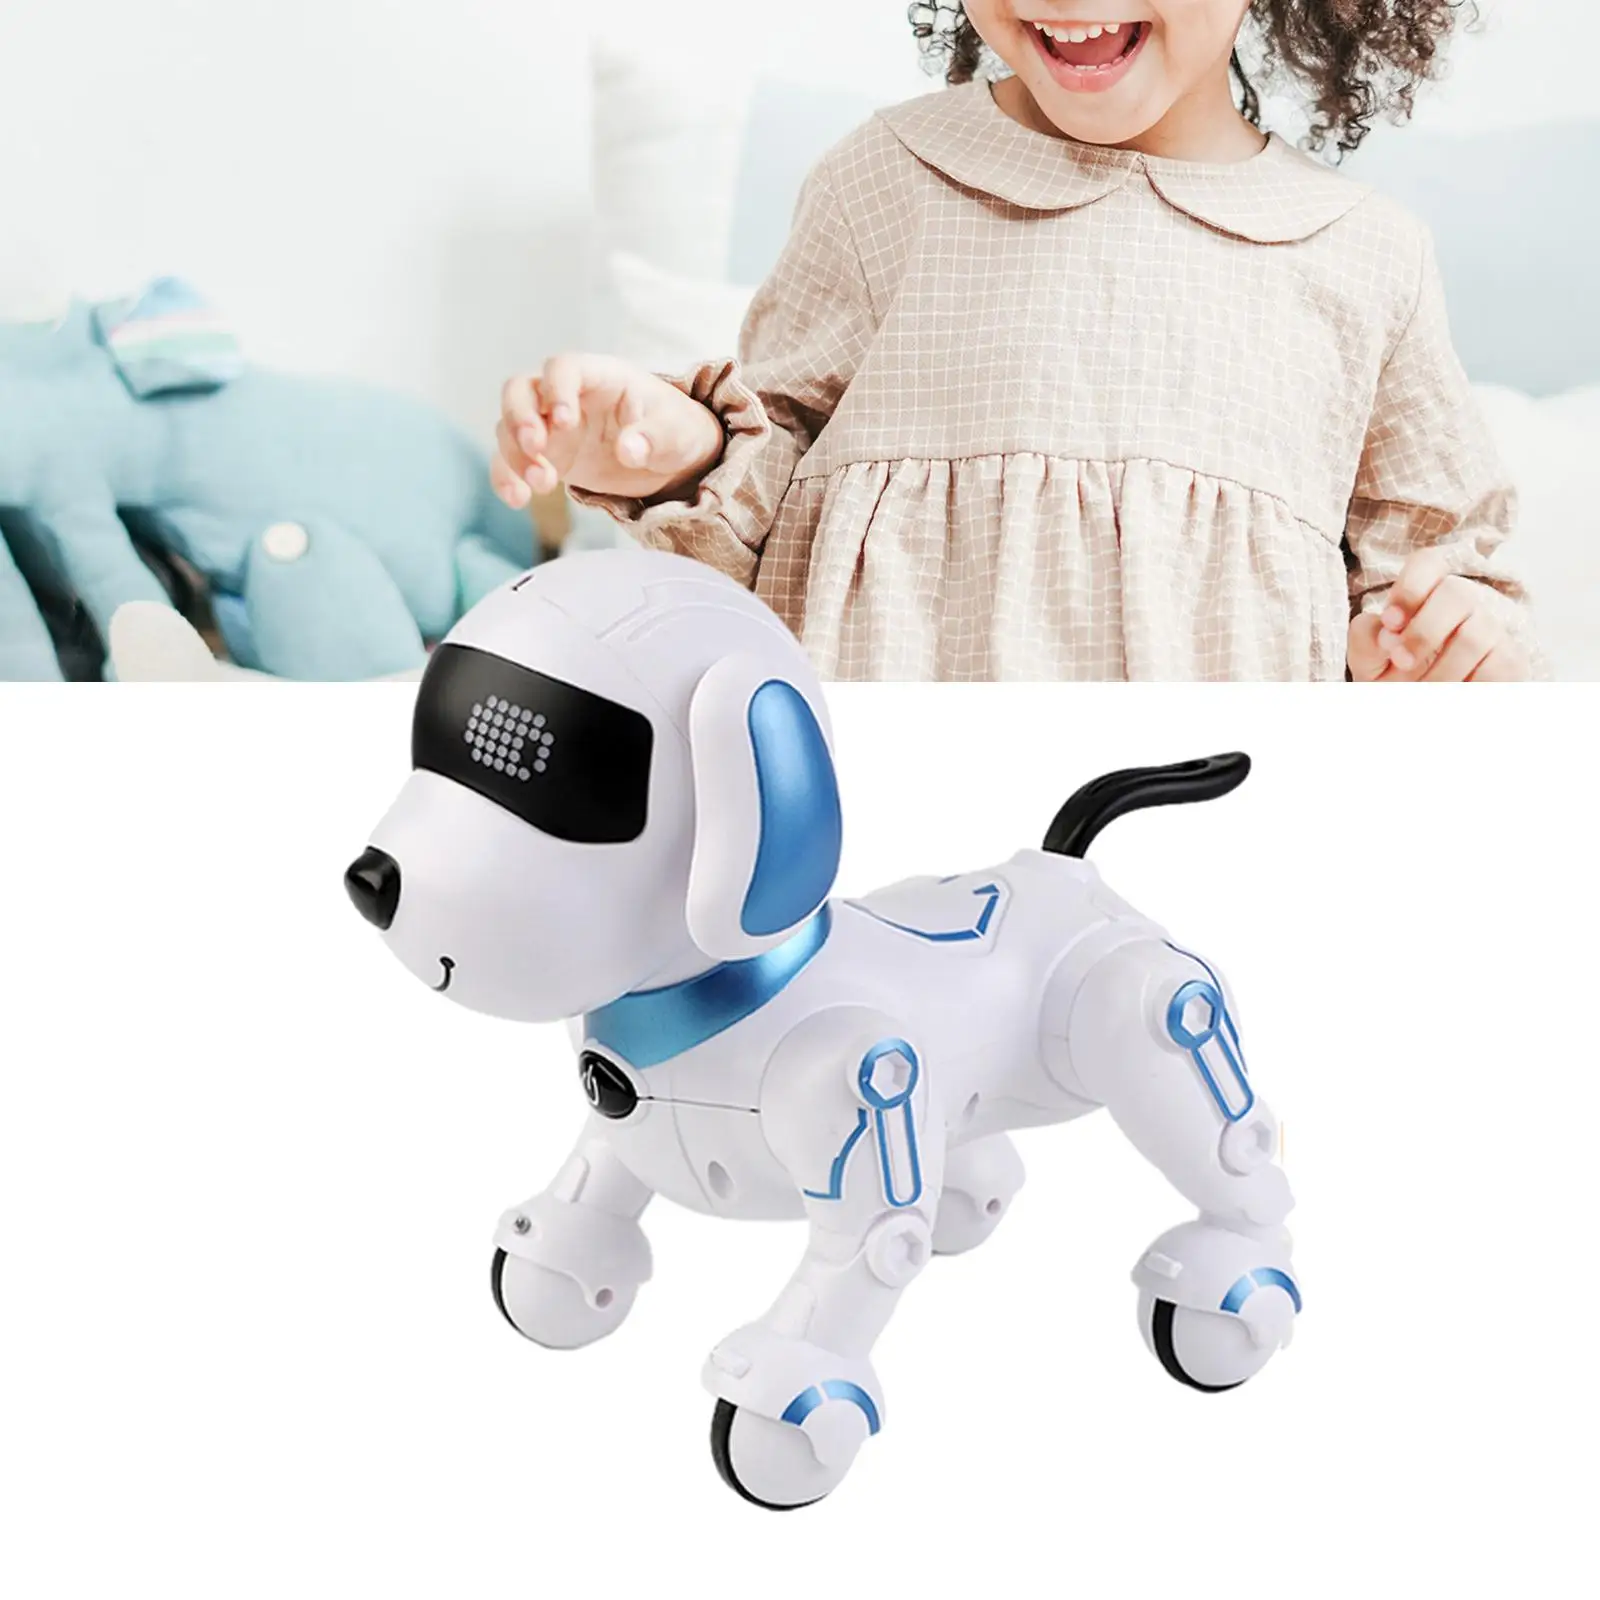 Remote Control Robot Dog Music Dancing with LED Eyes Imitates Animals Right Programming Robotic Puppy for Children 8 9 10 11 12